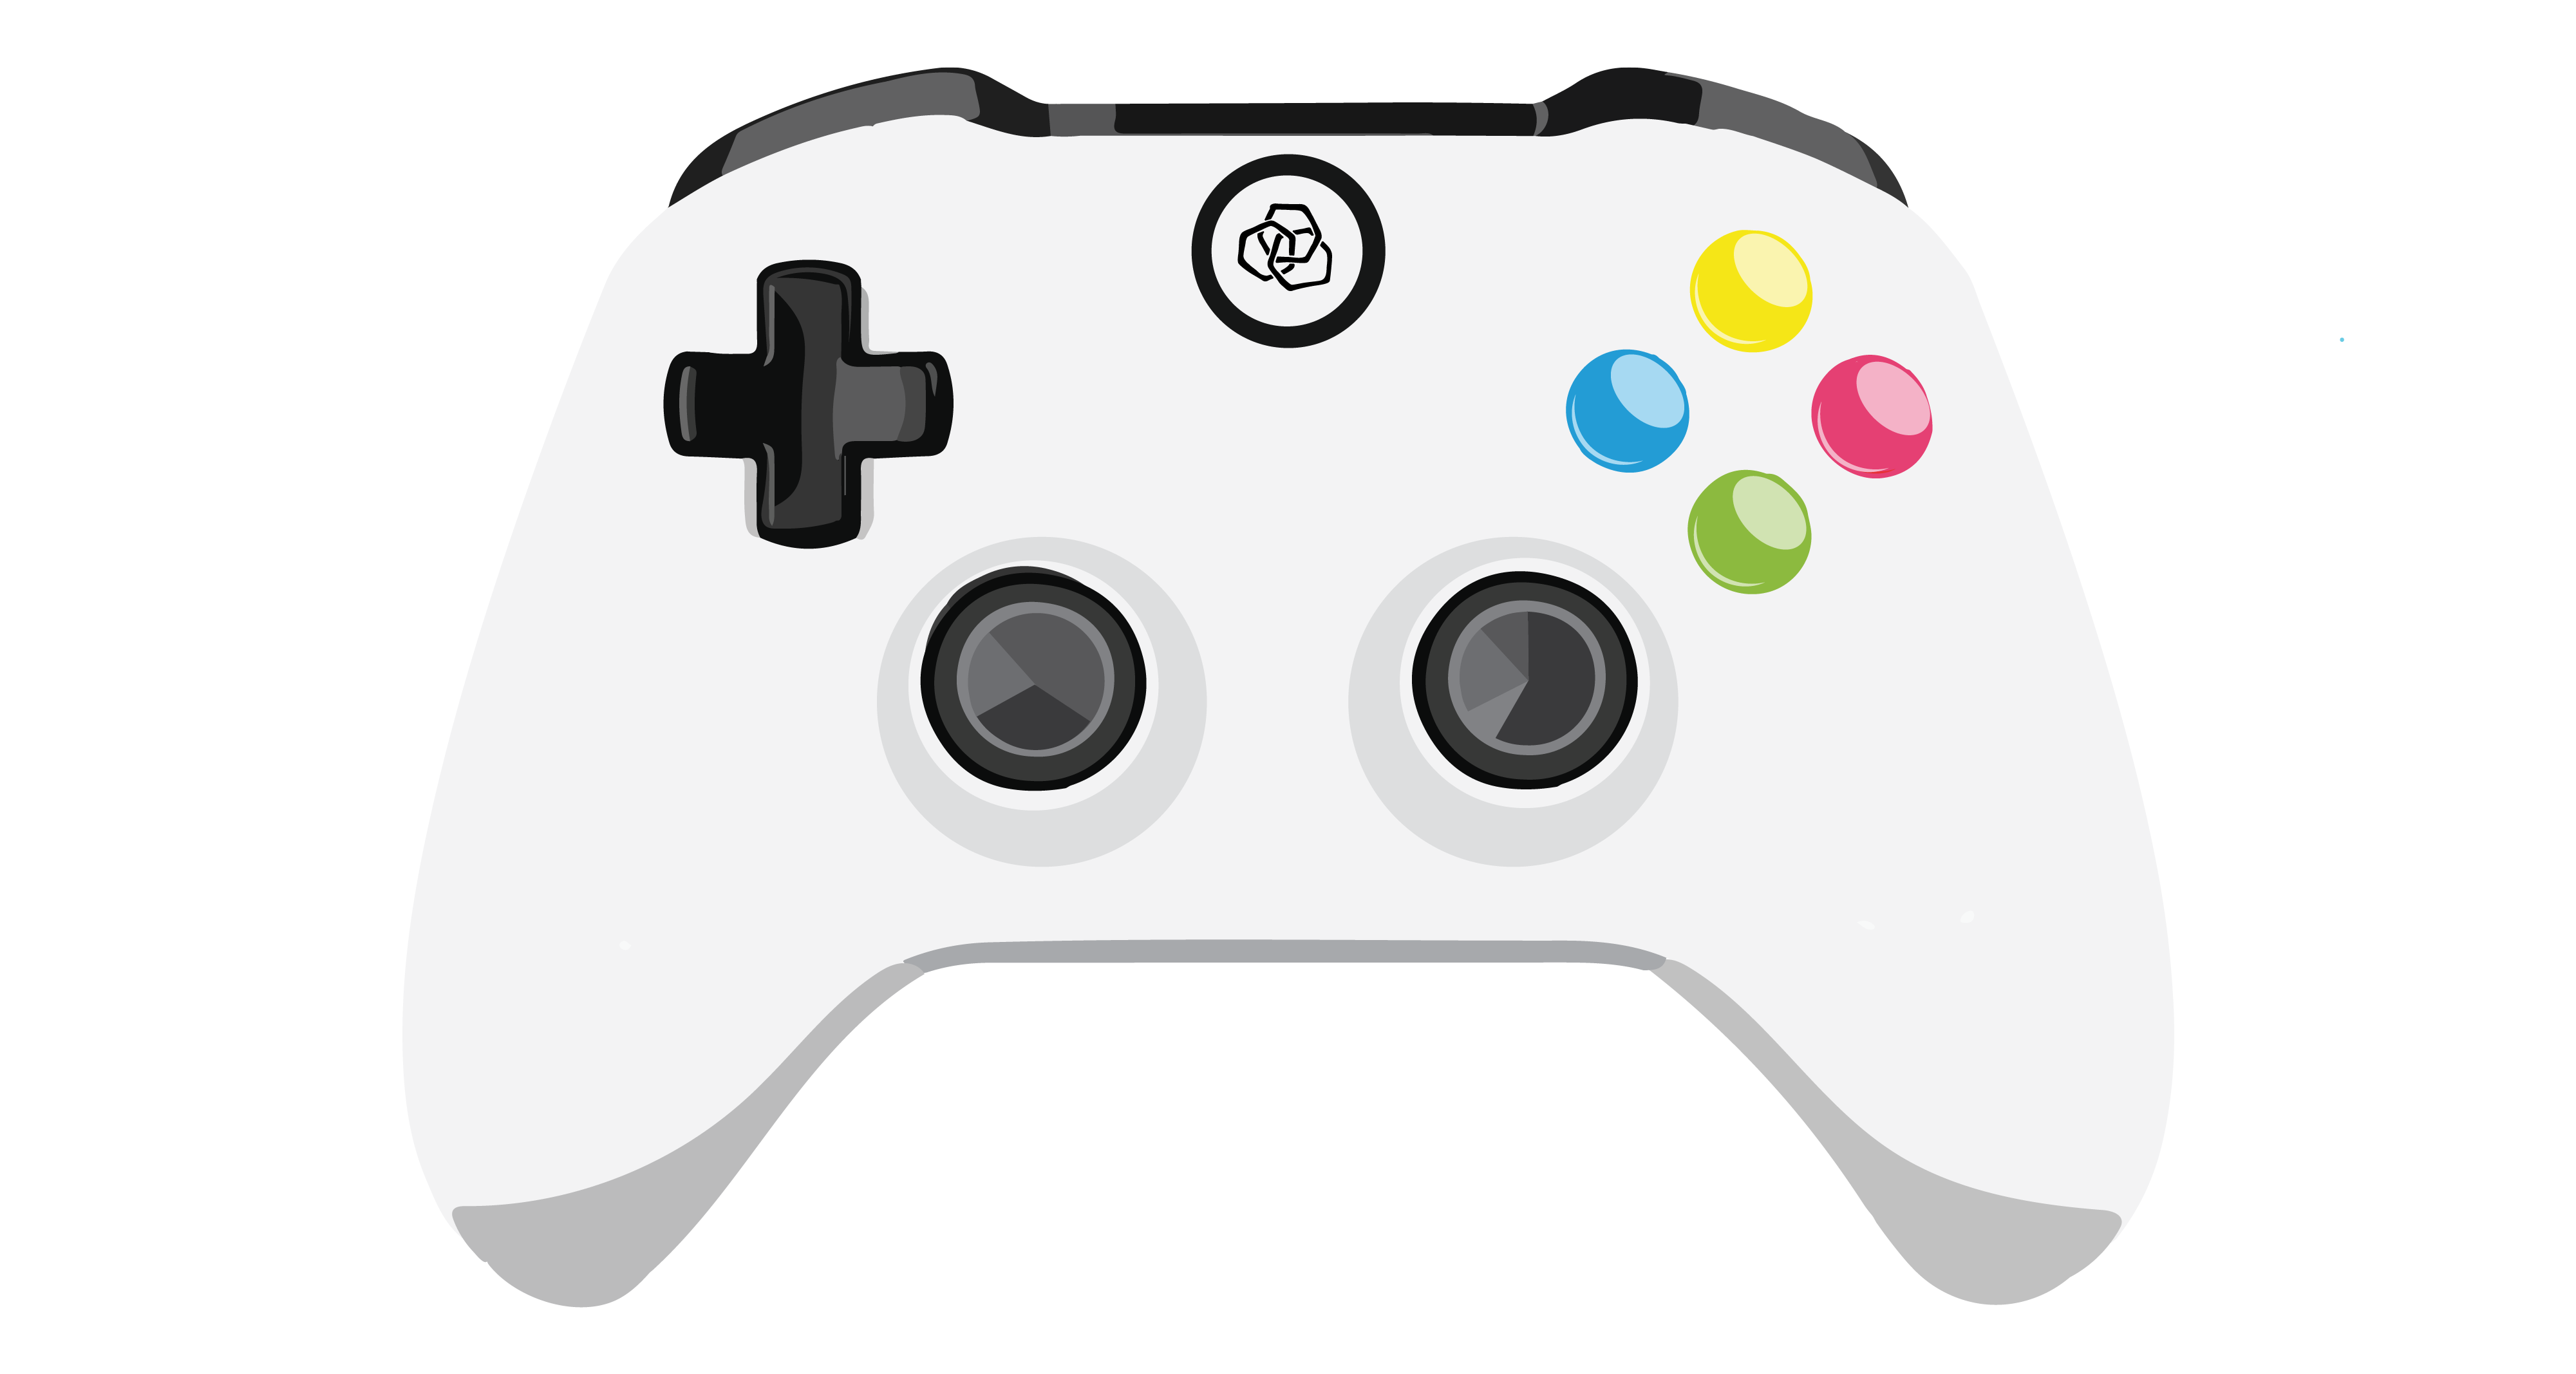 White, 2-handed game controller. In the centre is a white circular power button with a black circumference. On the top left is a black cross button, below it to its right is a circular black button, to its left is another black circular button, and above and to its right are 4 small coloured circular buttons arranged in a square: one blue, one green, one yellow, and one red.